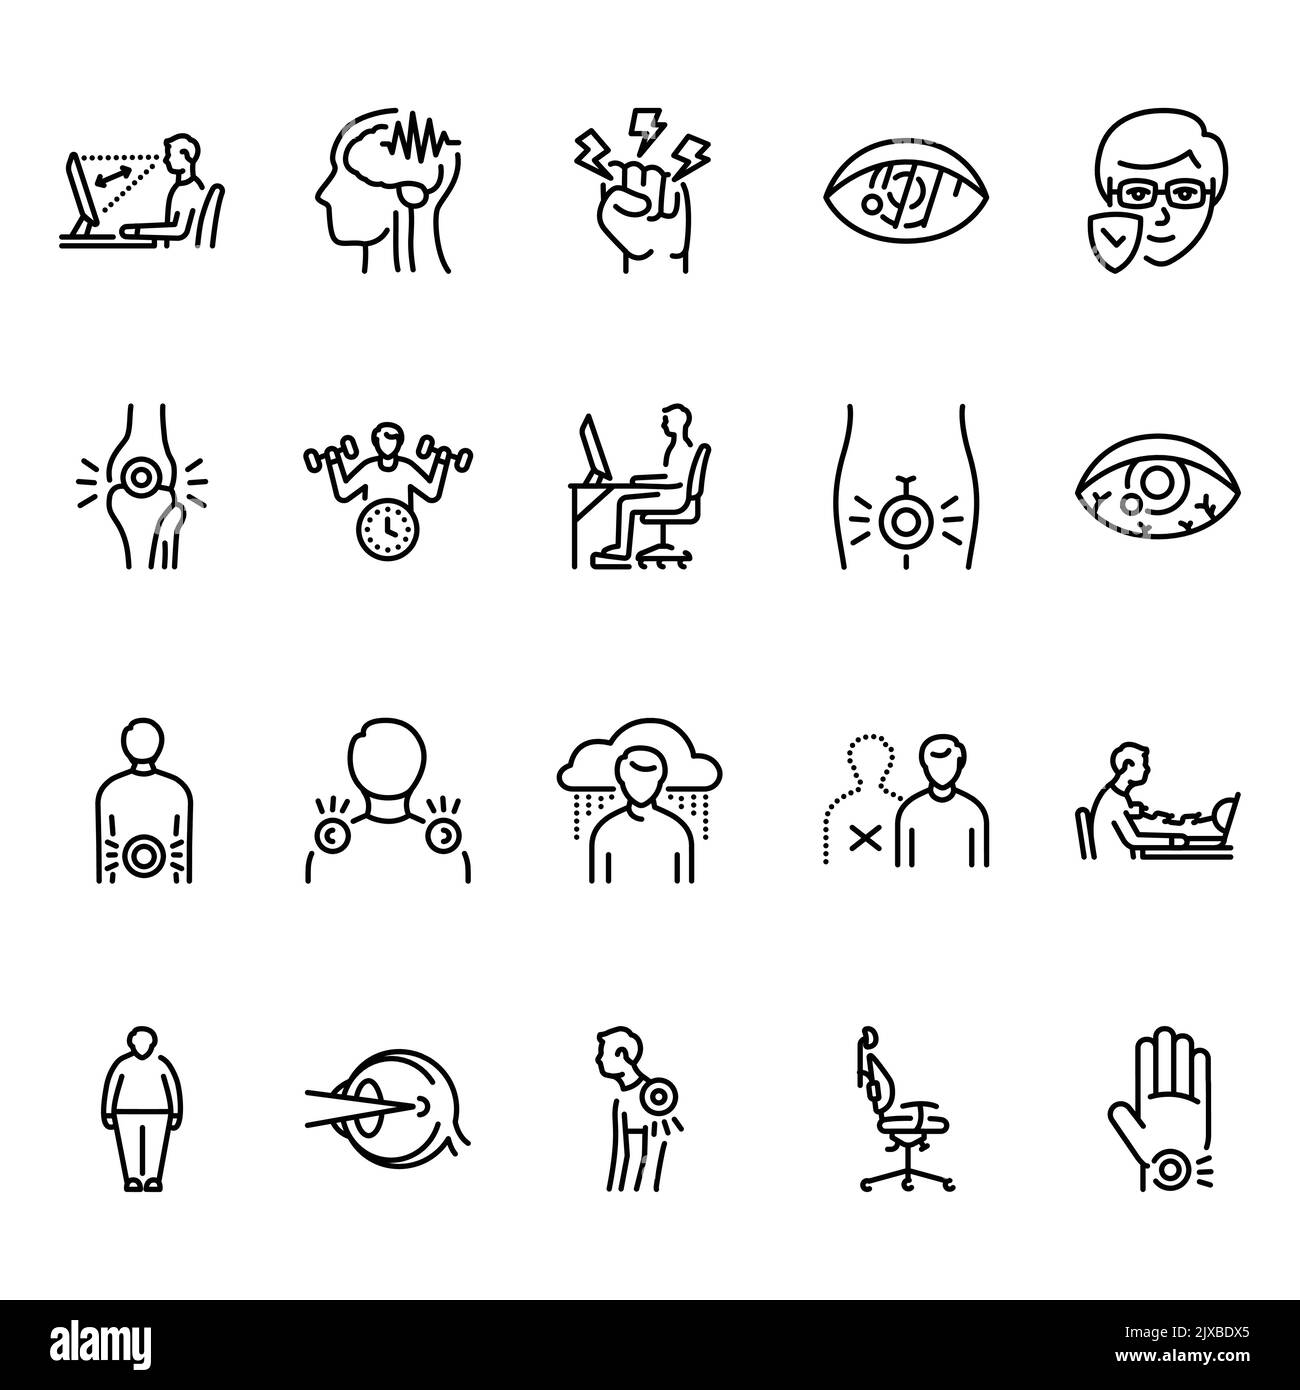 Computer-induced medical problems color line icons set. Signs for web page Stock Vector